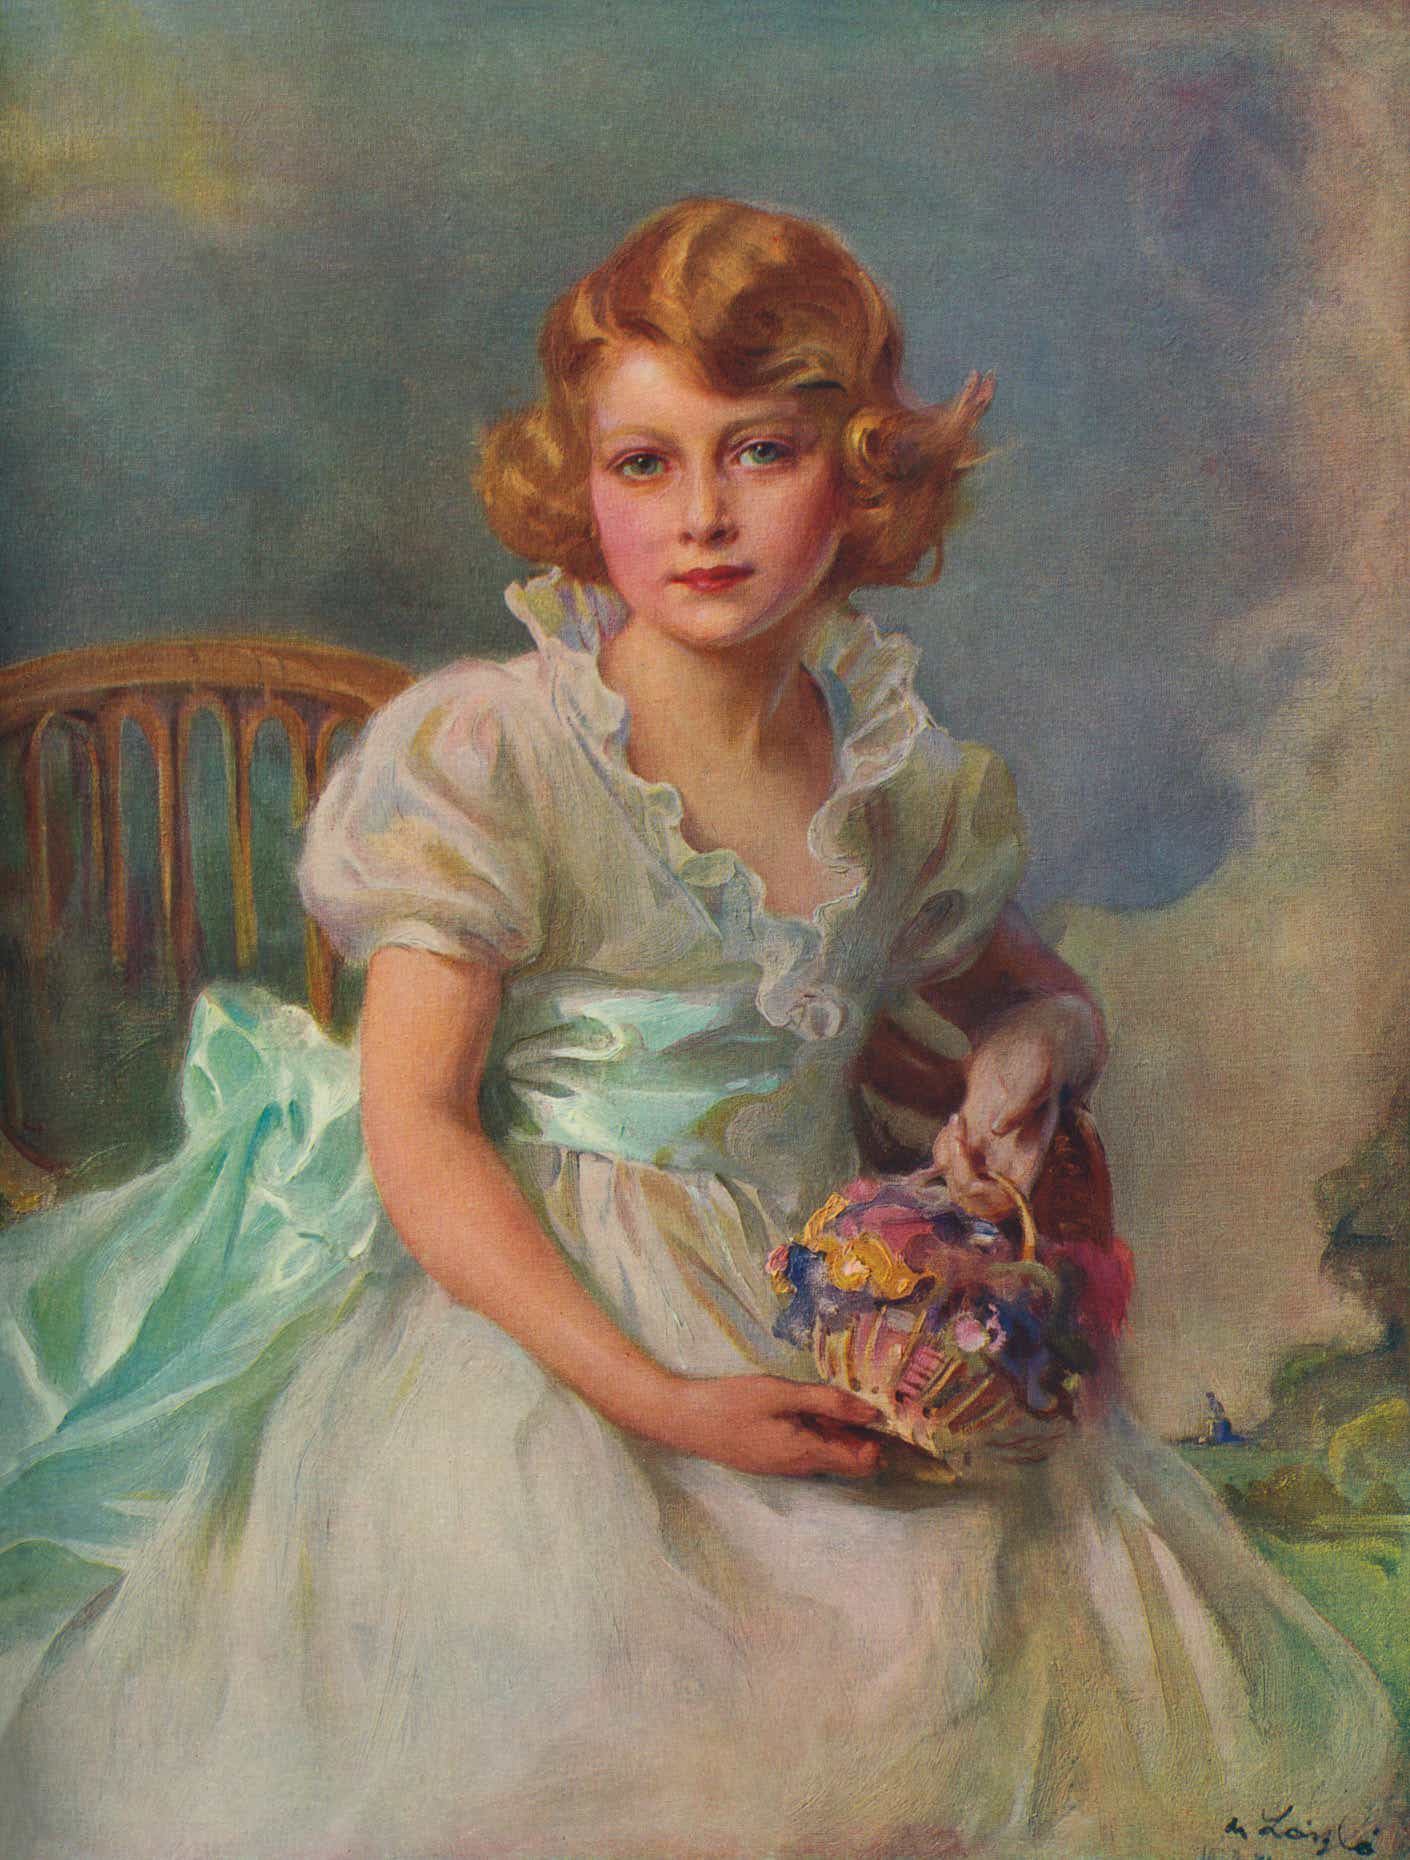 A 1936 portrait of the young princess sitting with a basket of flowers in her hands.